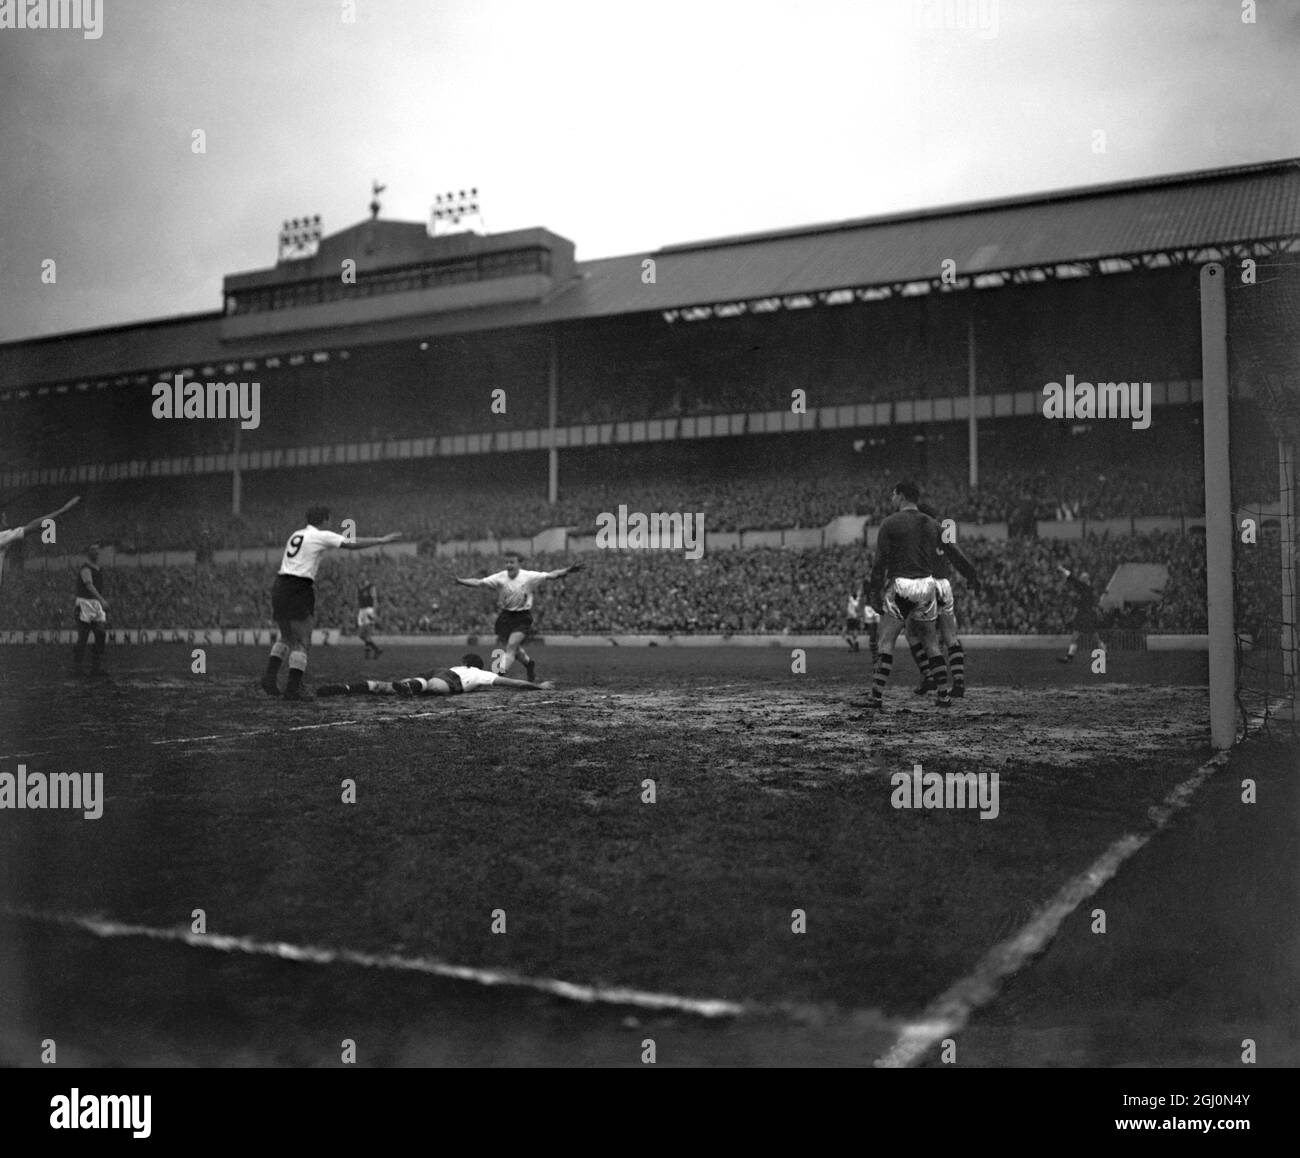 Tottenham Hotspurs Half-back Norman is pictured lying full length on the ground this afternoon after scoring the Spurs first goal in the match they played against Burnley at the Tottenham ground Result Spurs 4 Burnley 4 3 December 1960 Stock Photo